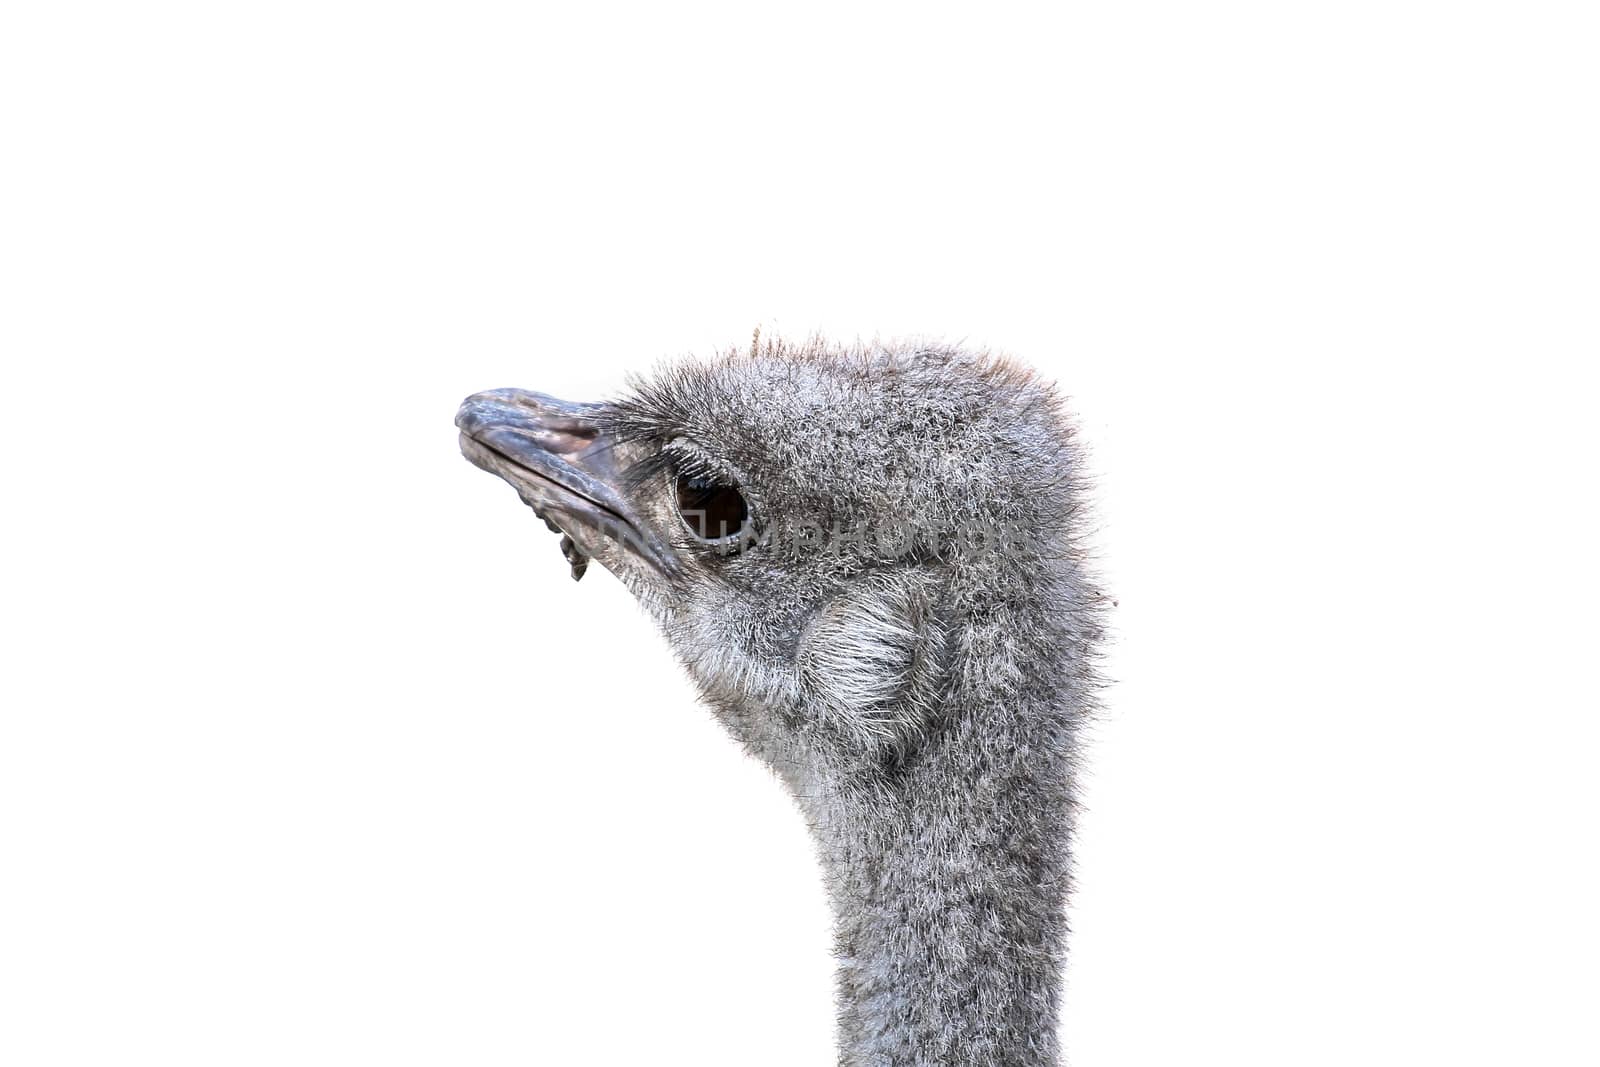 Ostrich head on a white background close-up
 by Opikanets